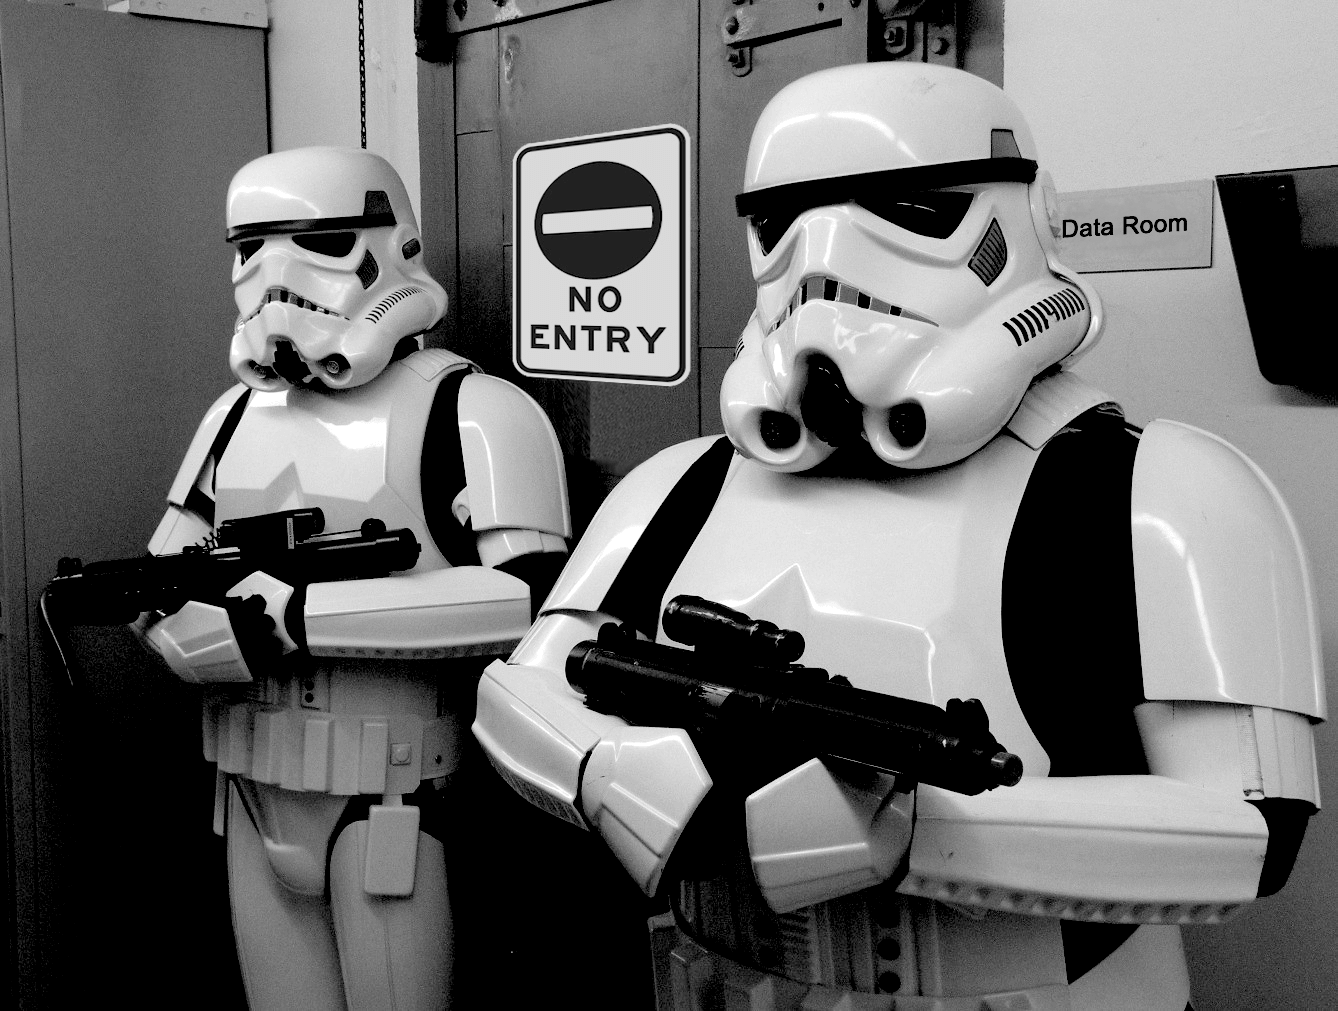 stormtroopers guarding a data room